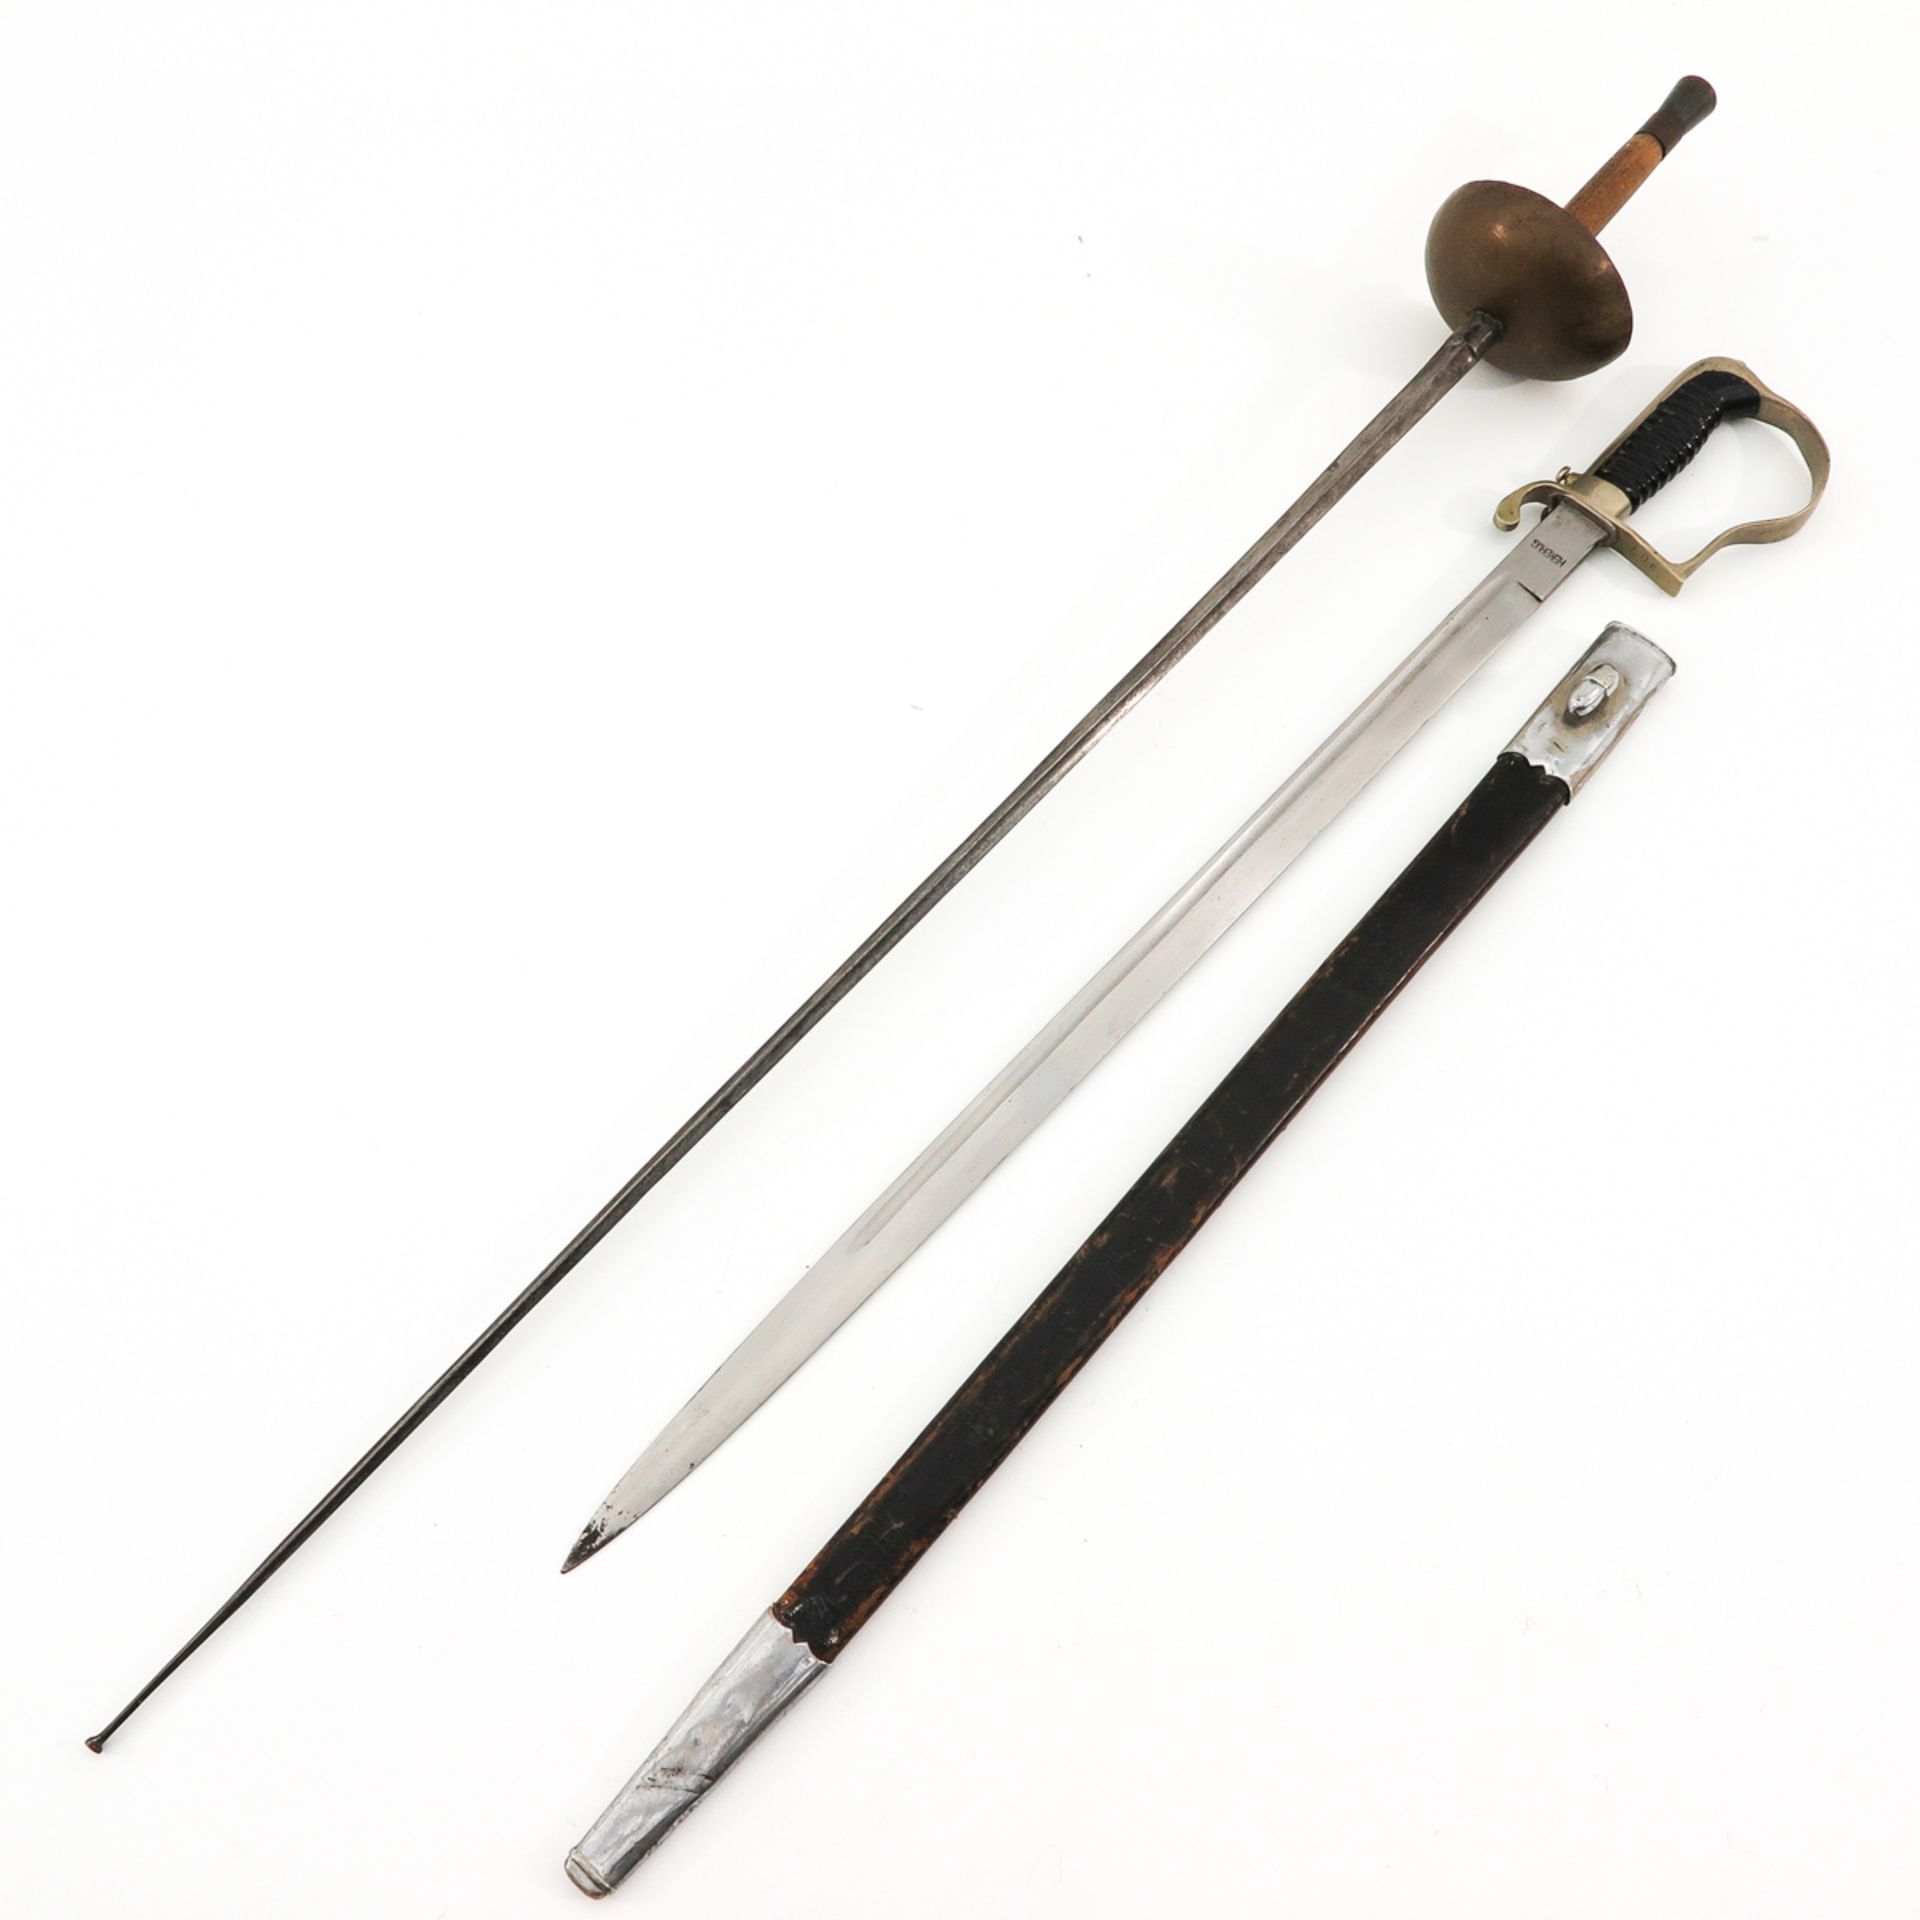 A Floret and Sword with Sheath